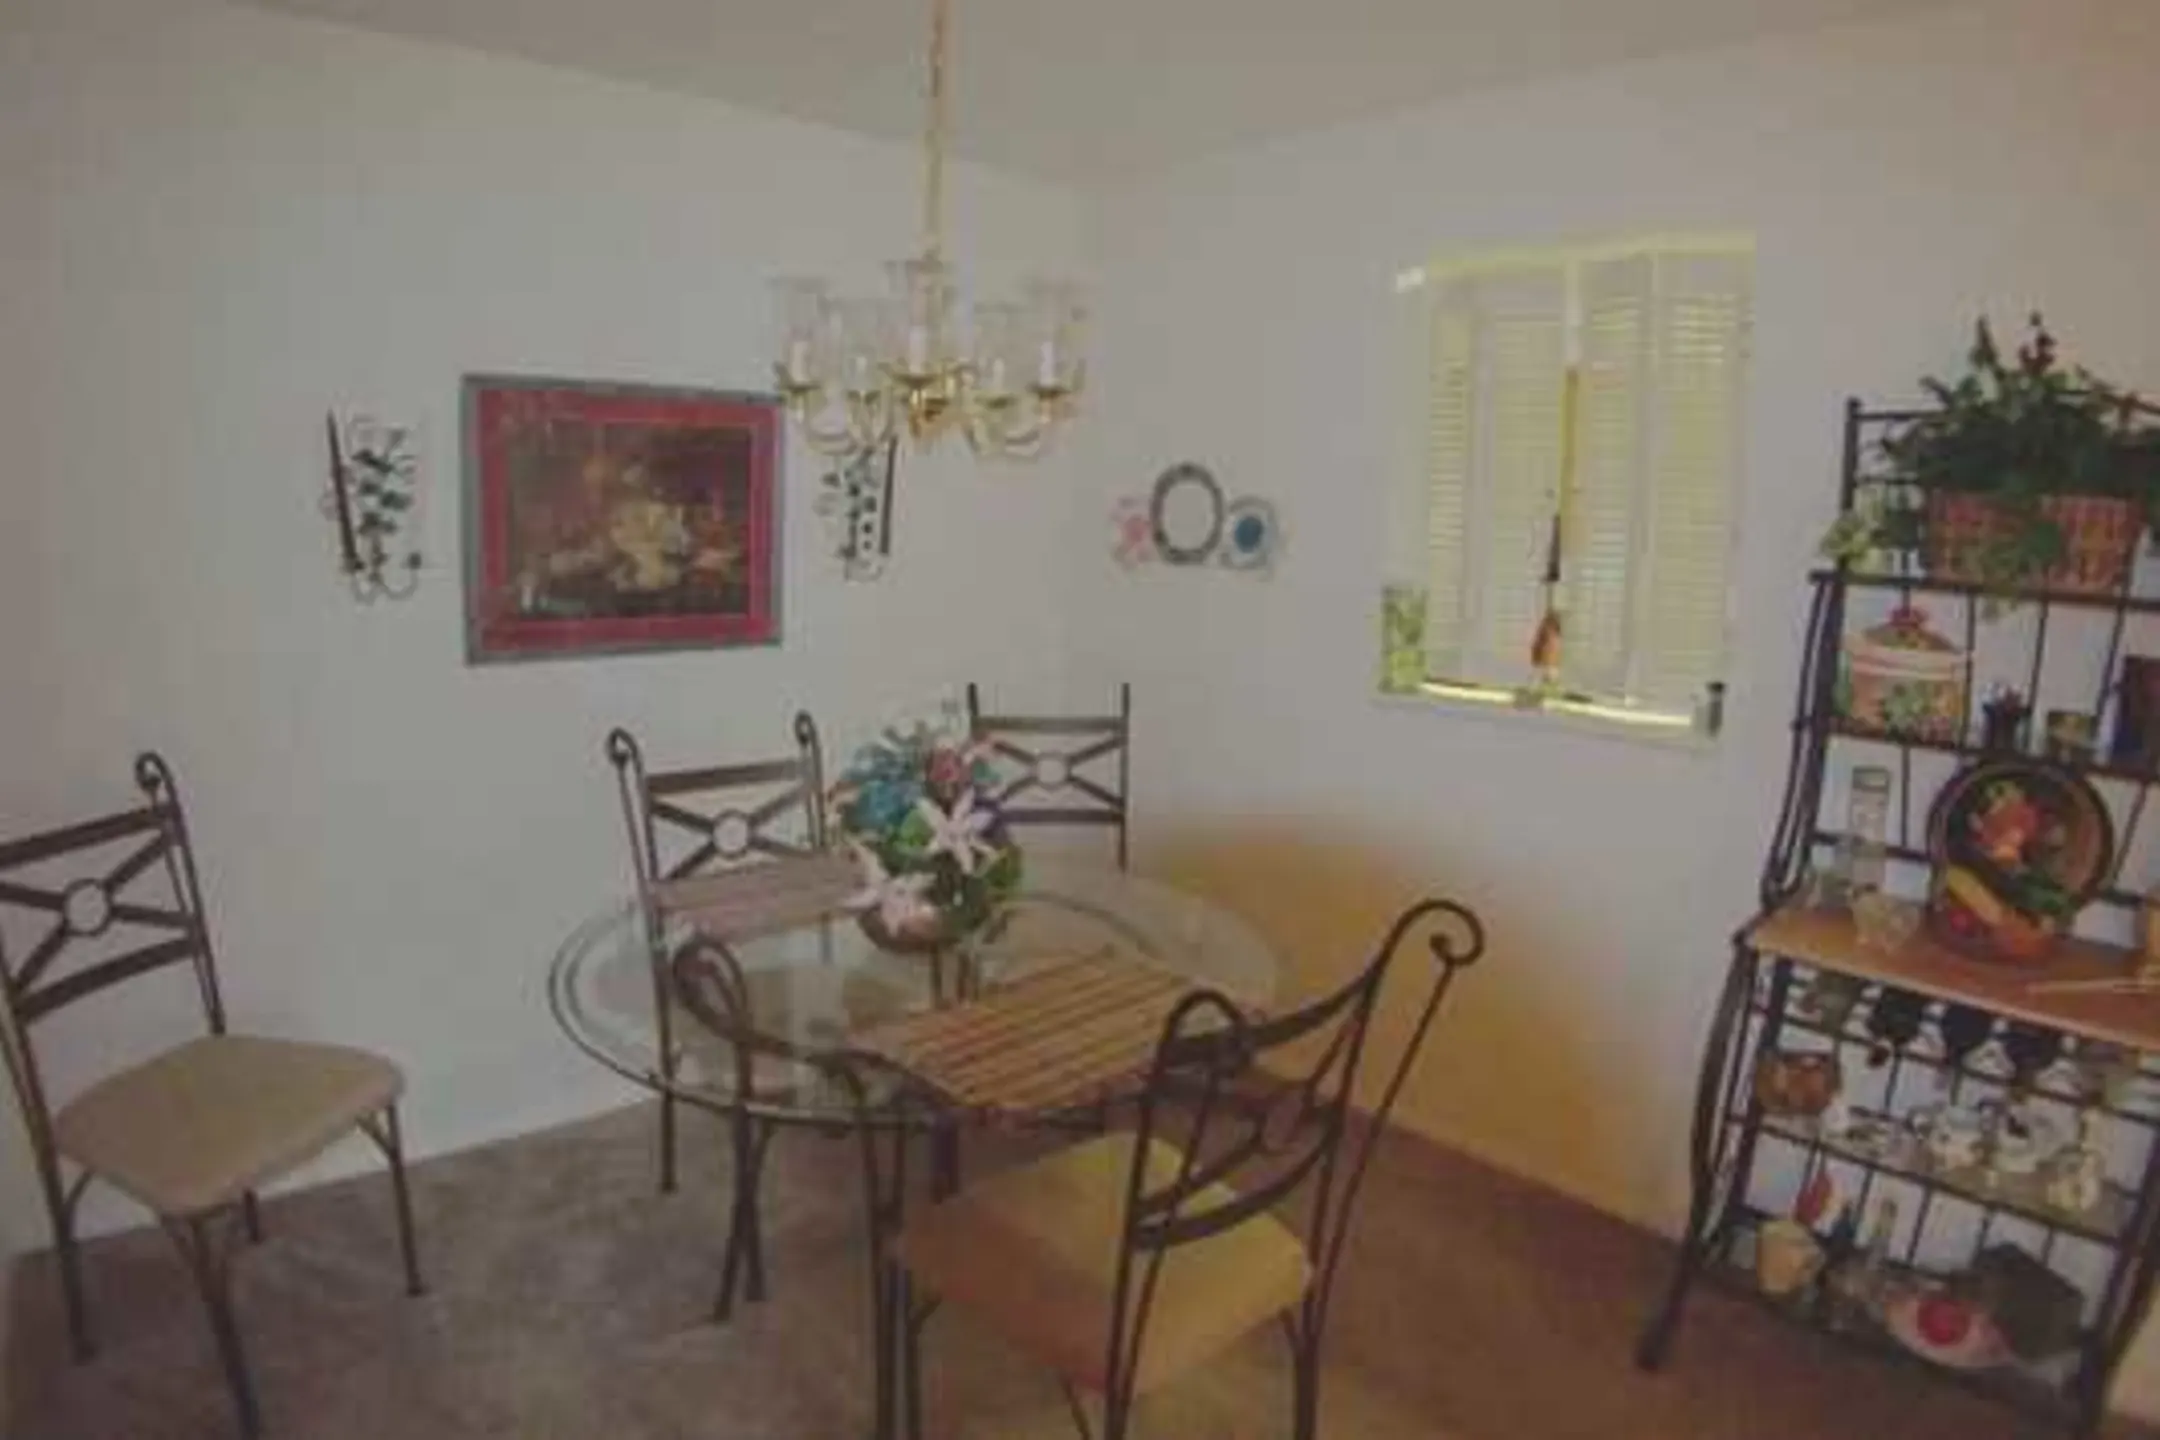 Dining Room - Glenbrook Park Apartments - Louisville, KY